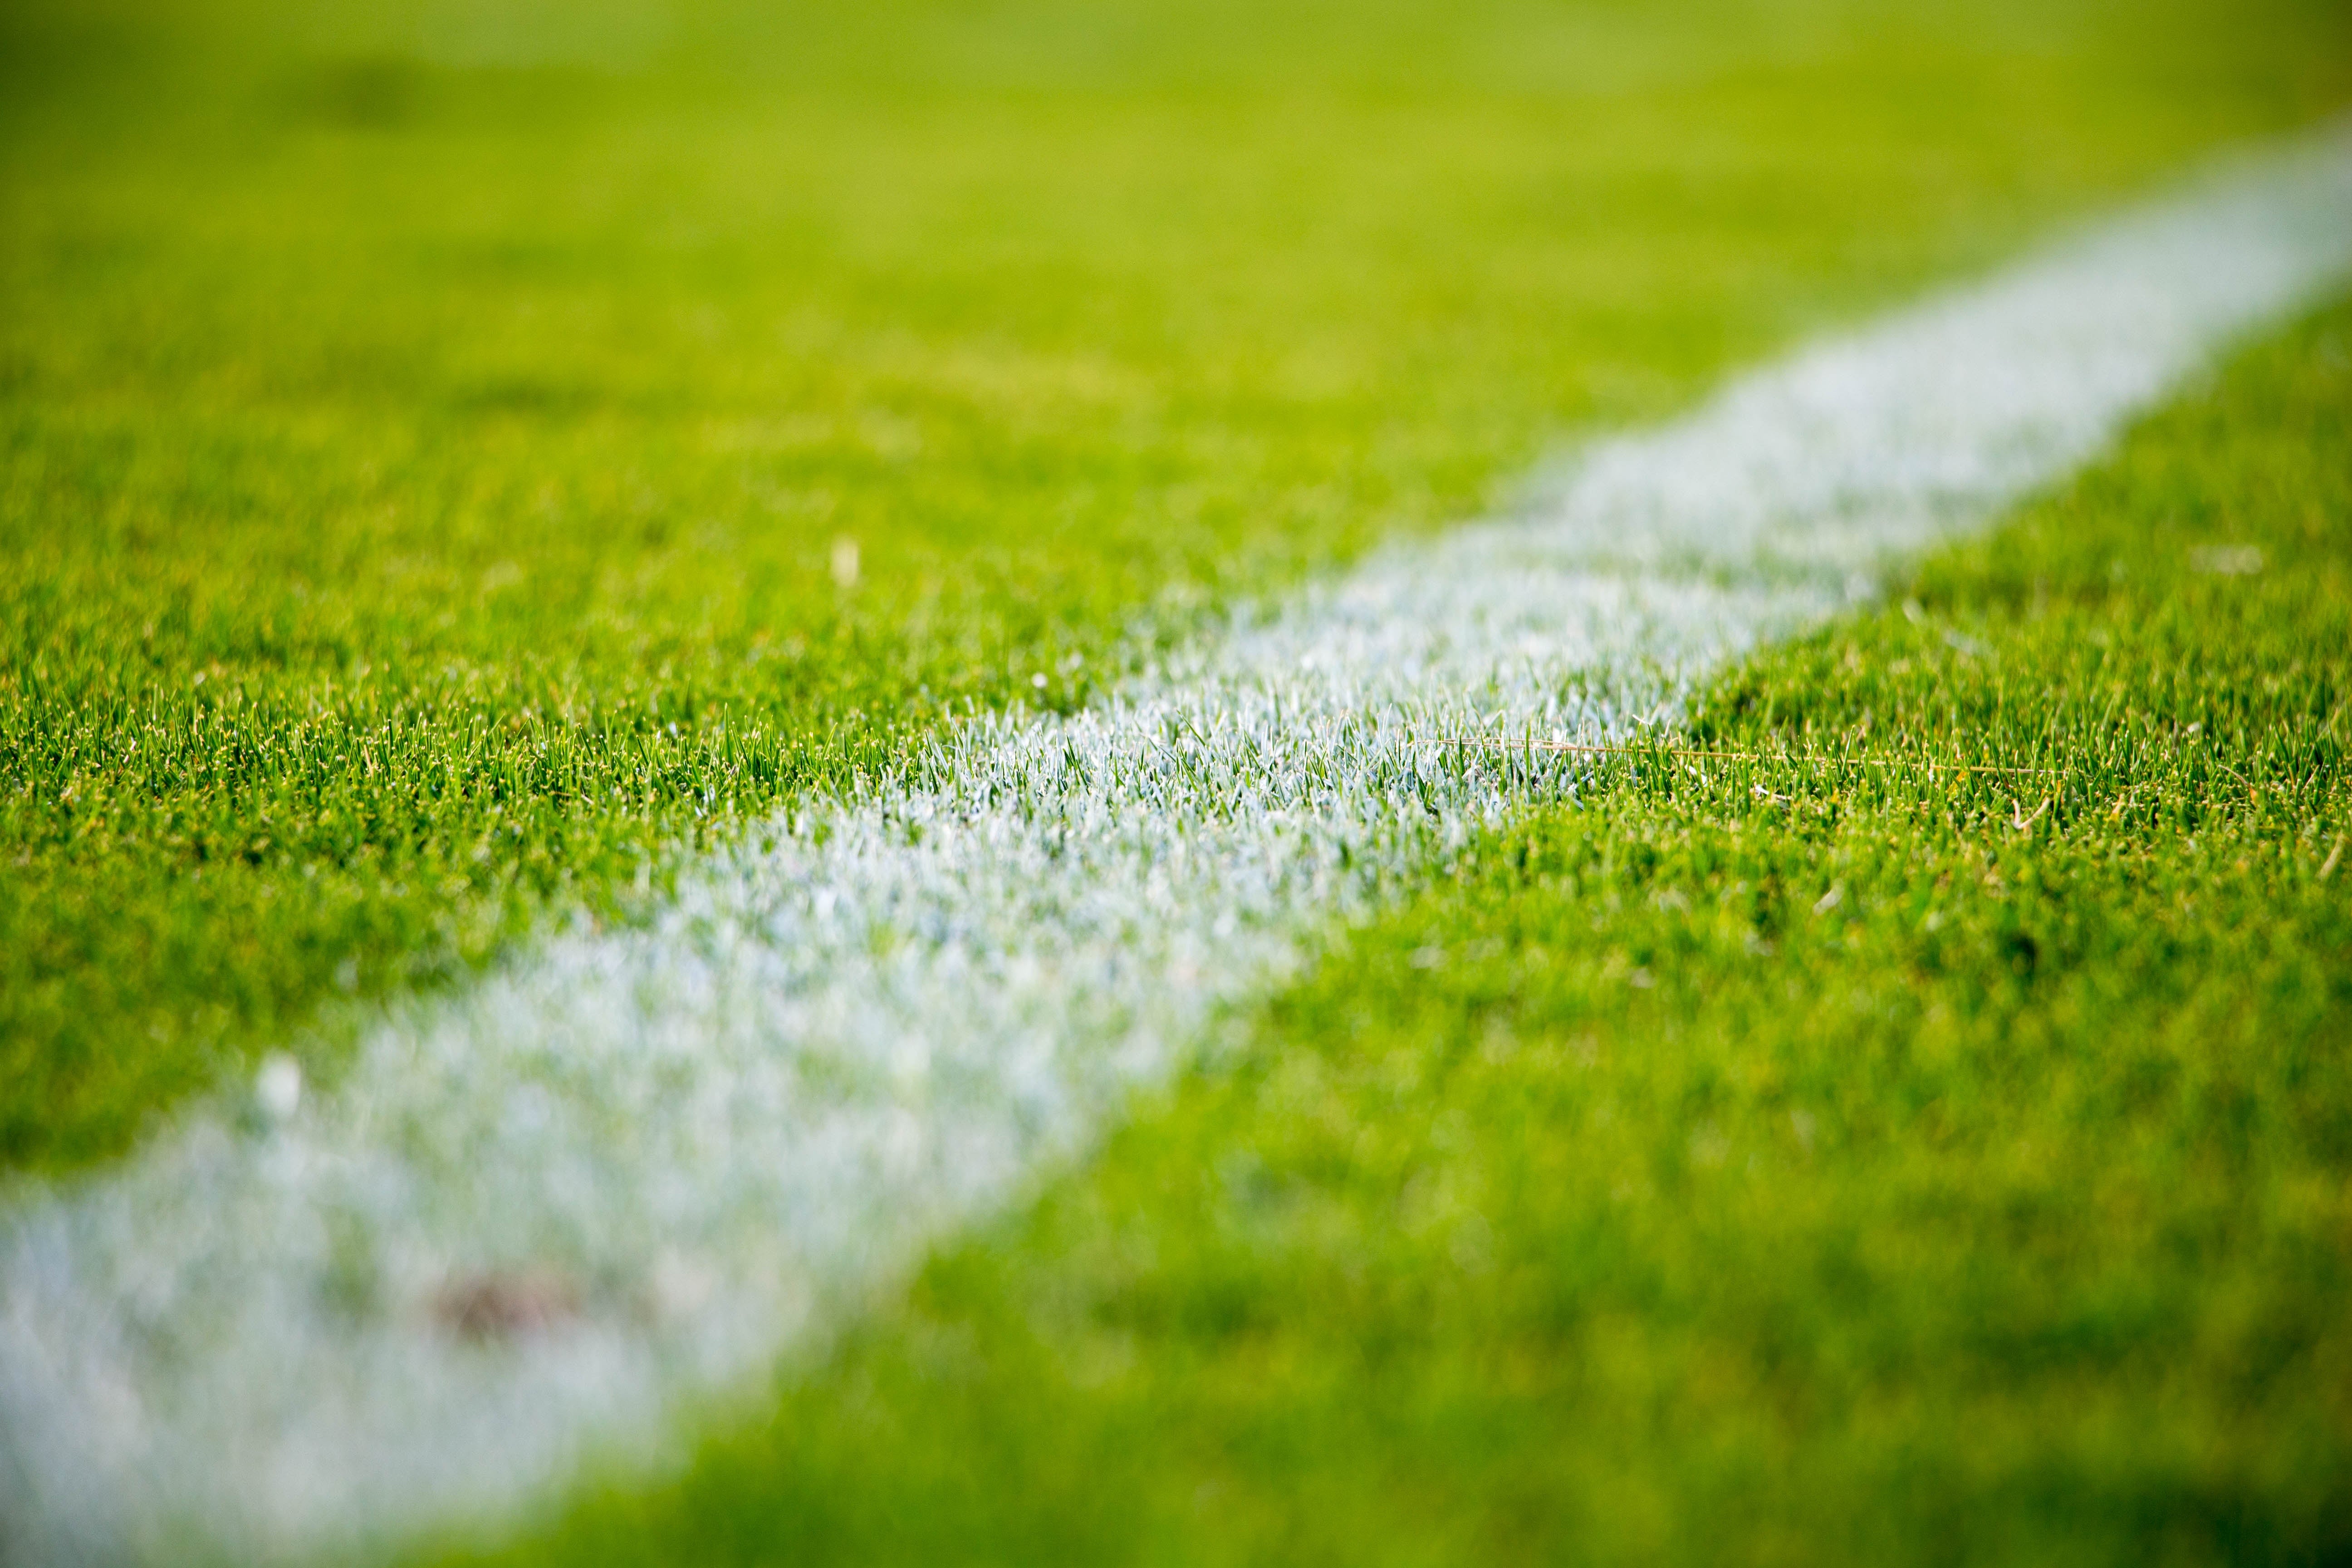 close up of a white line on green grass in a soccer field